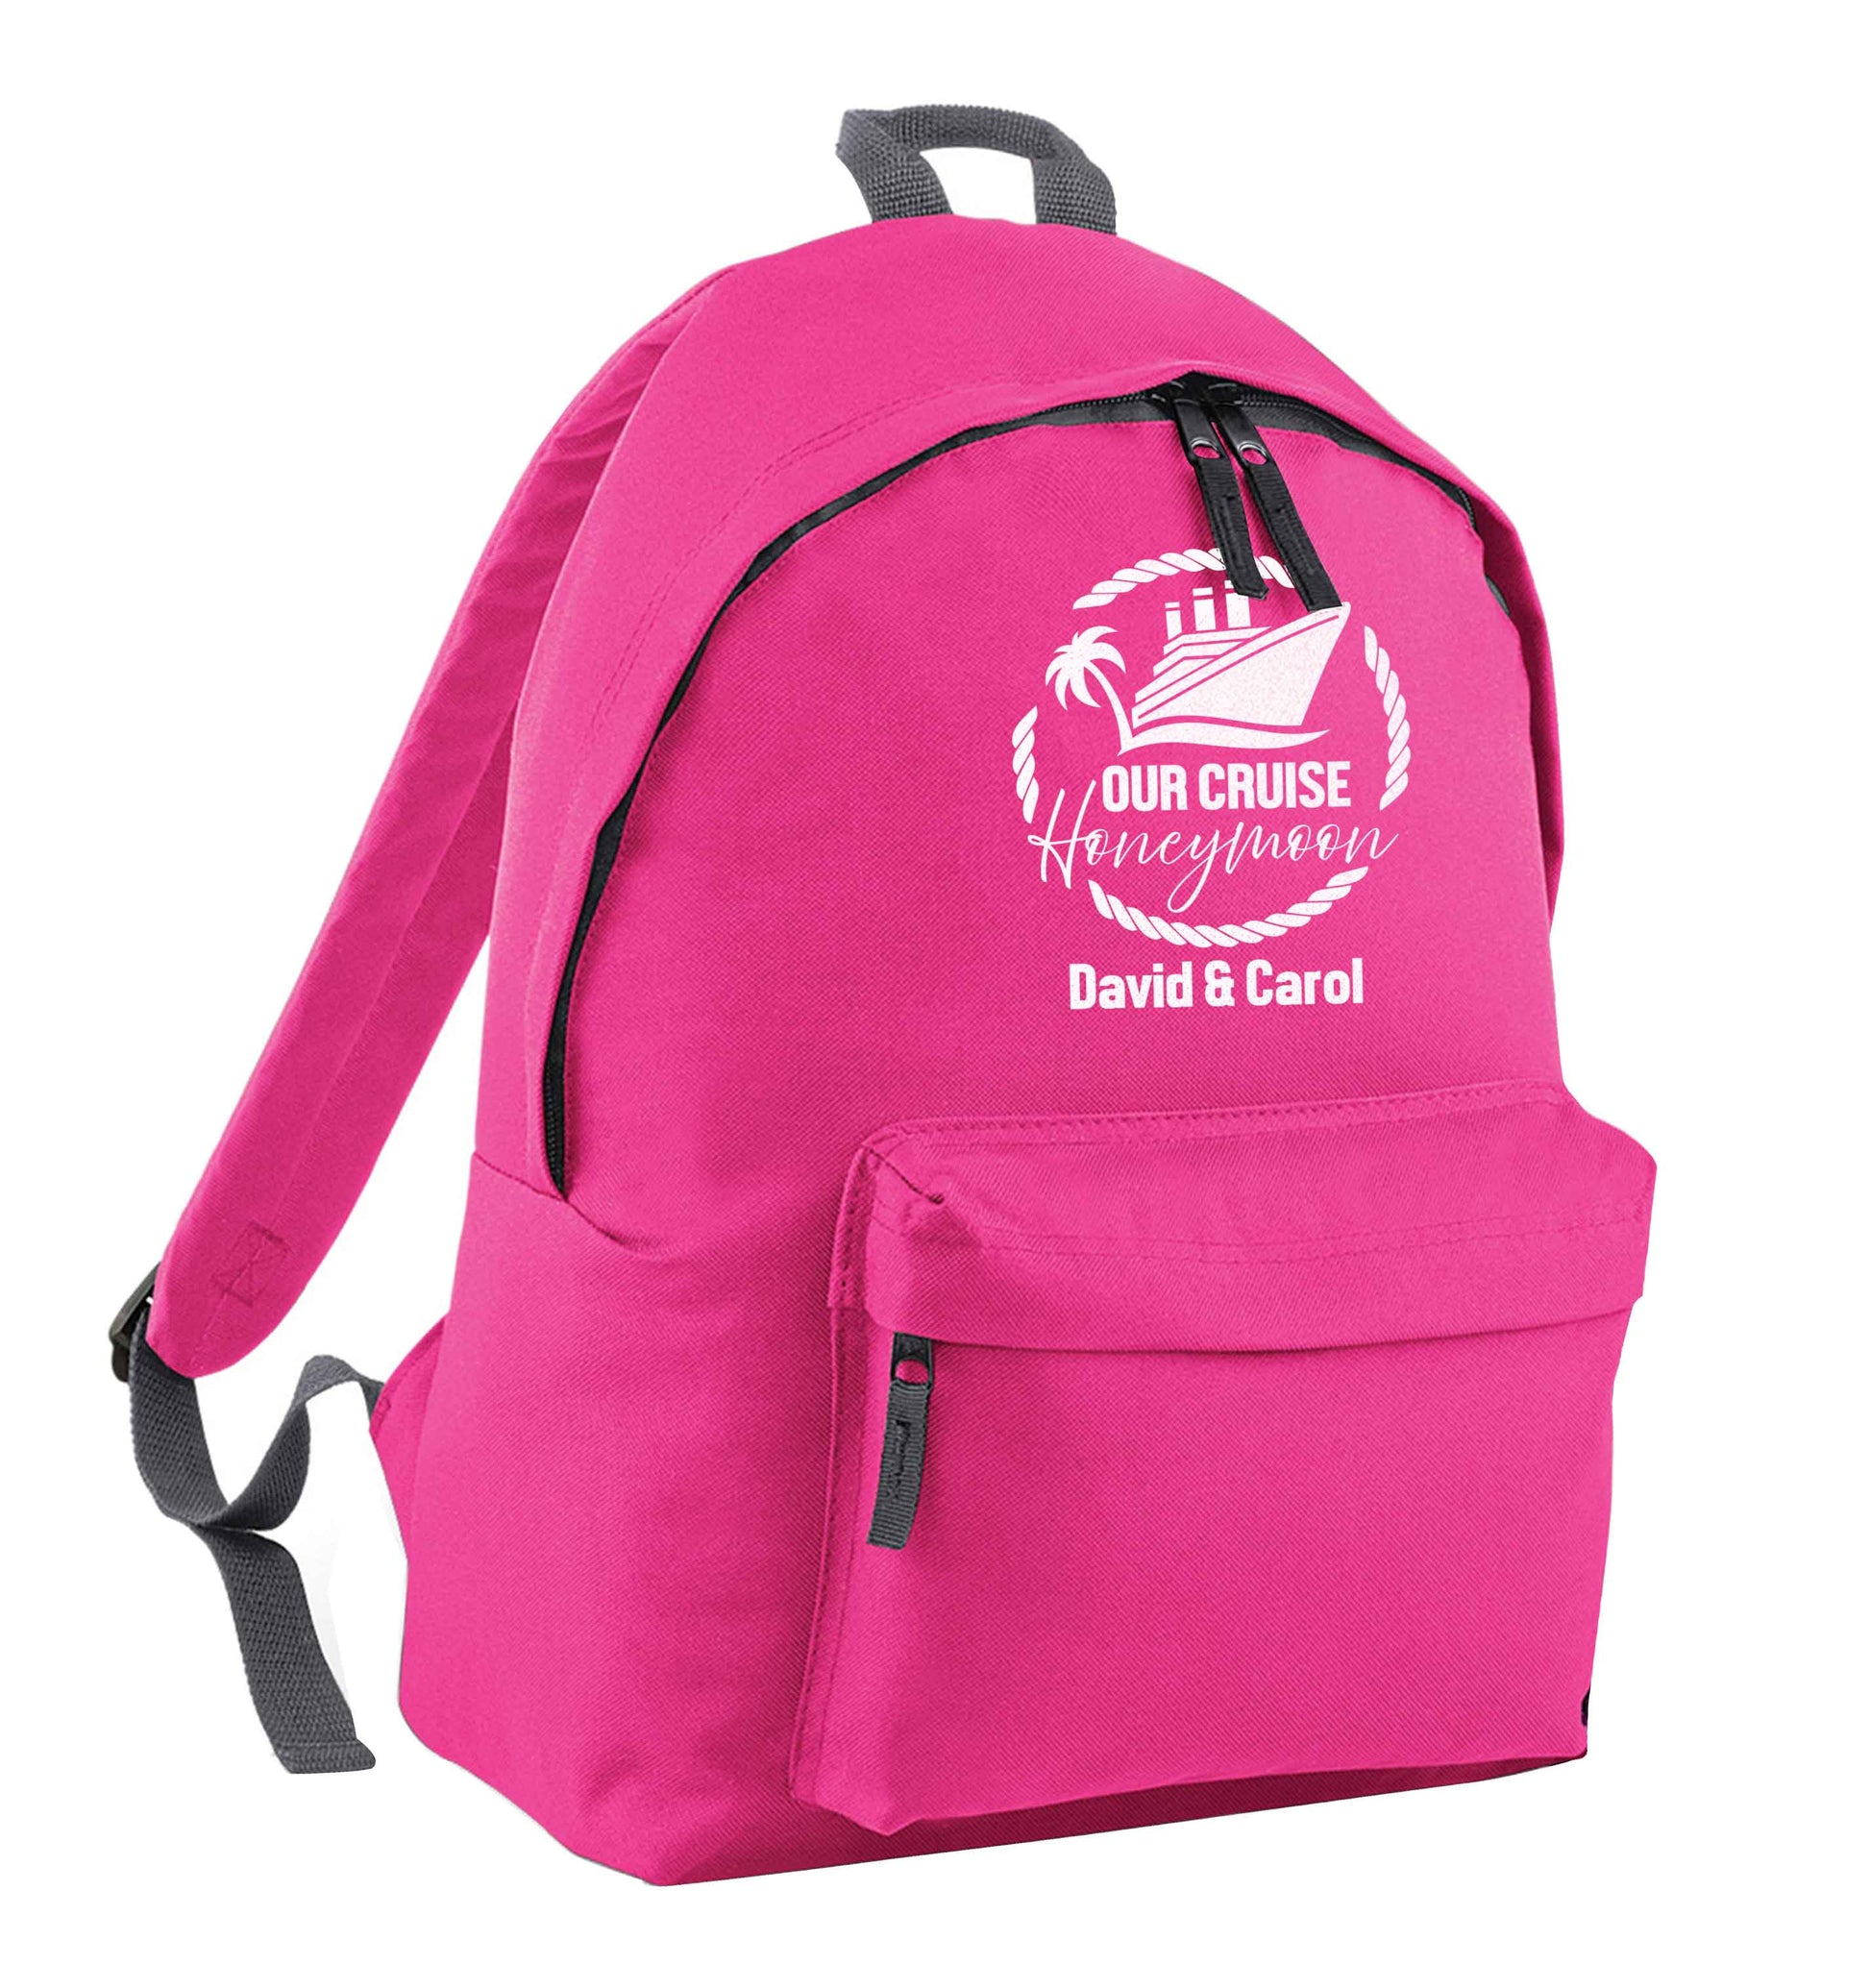 Our cruise honeymoon personalised pink adults backpack